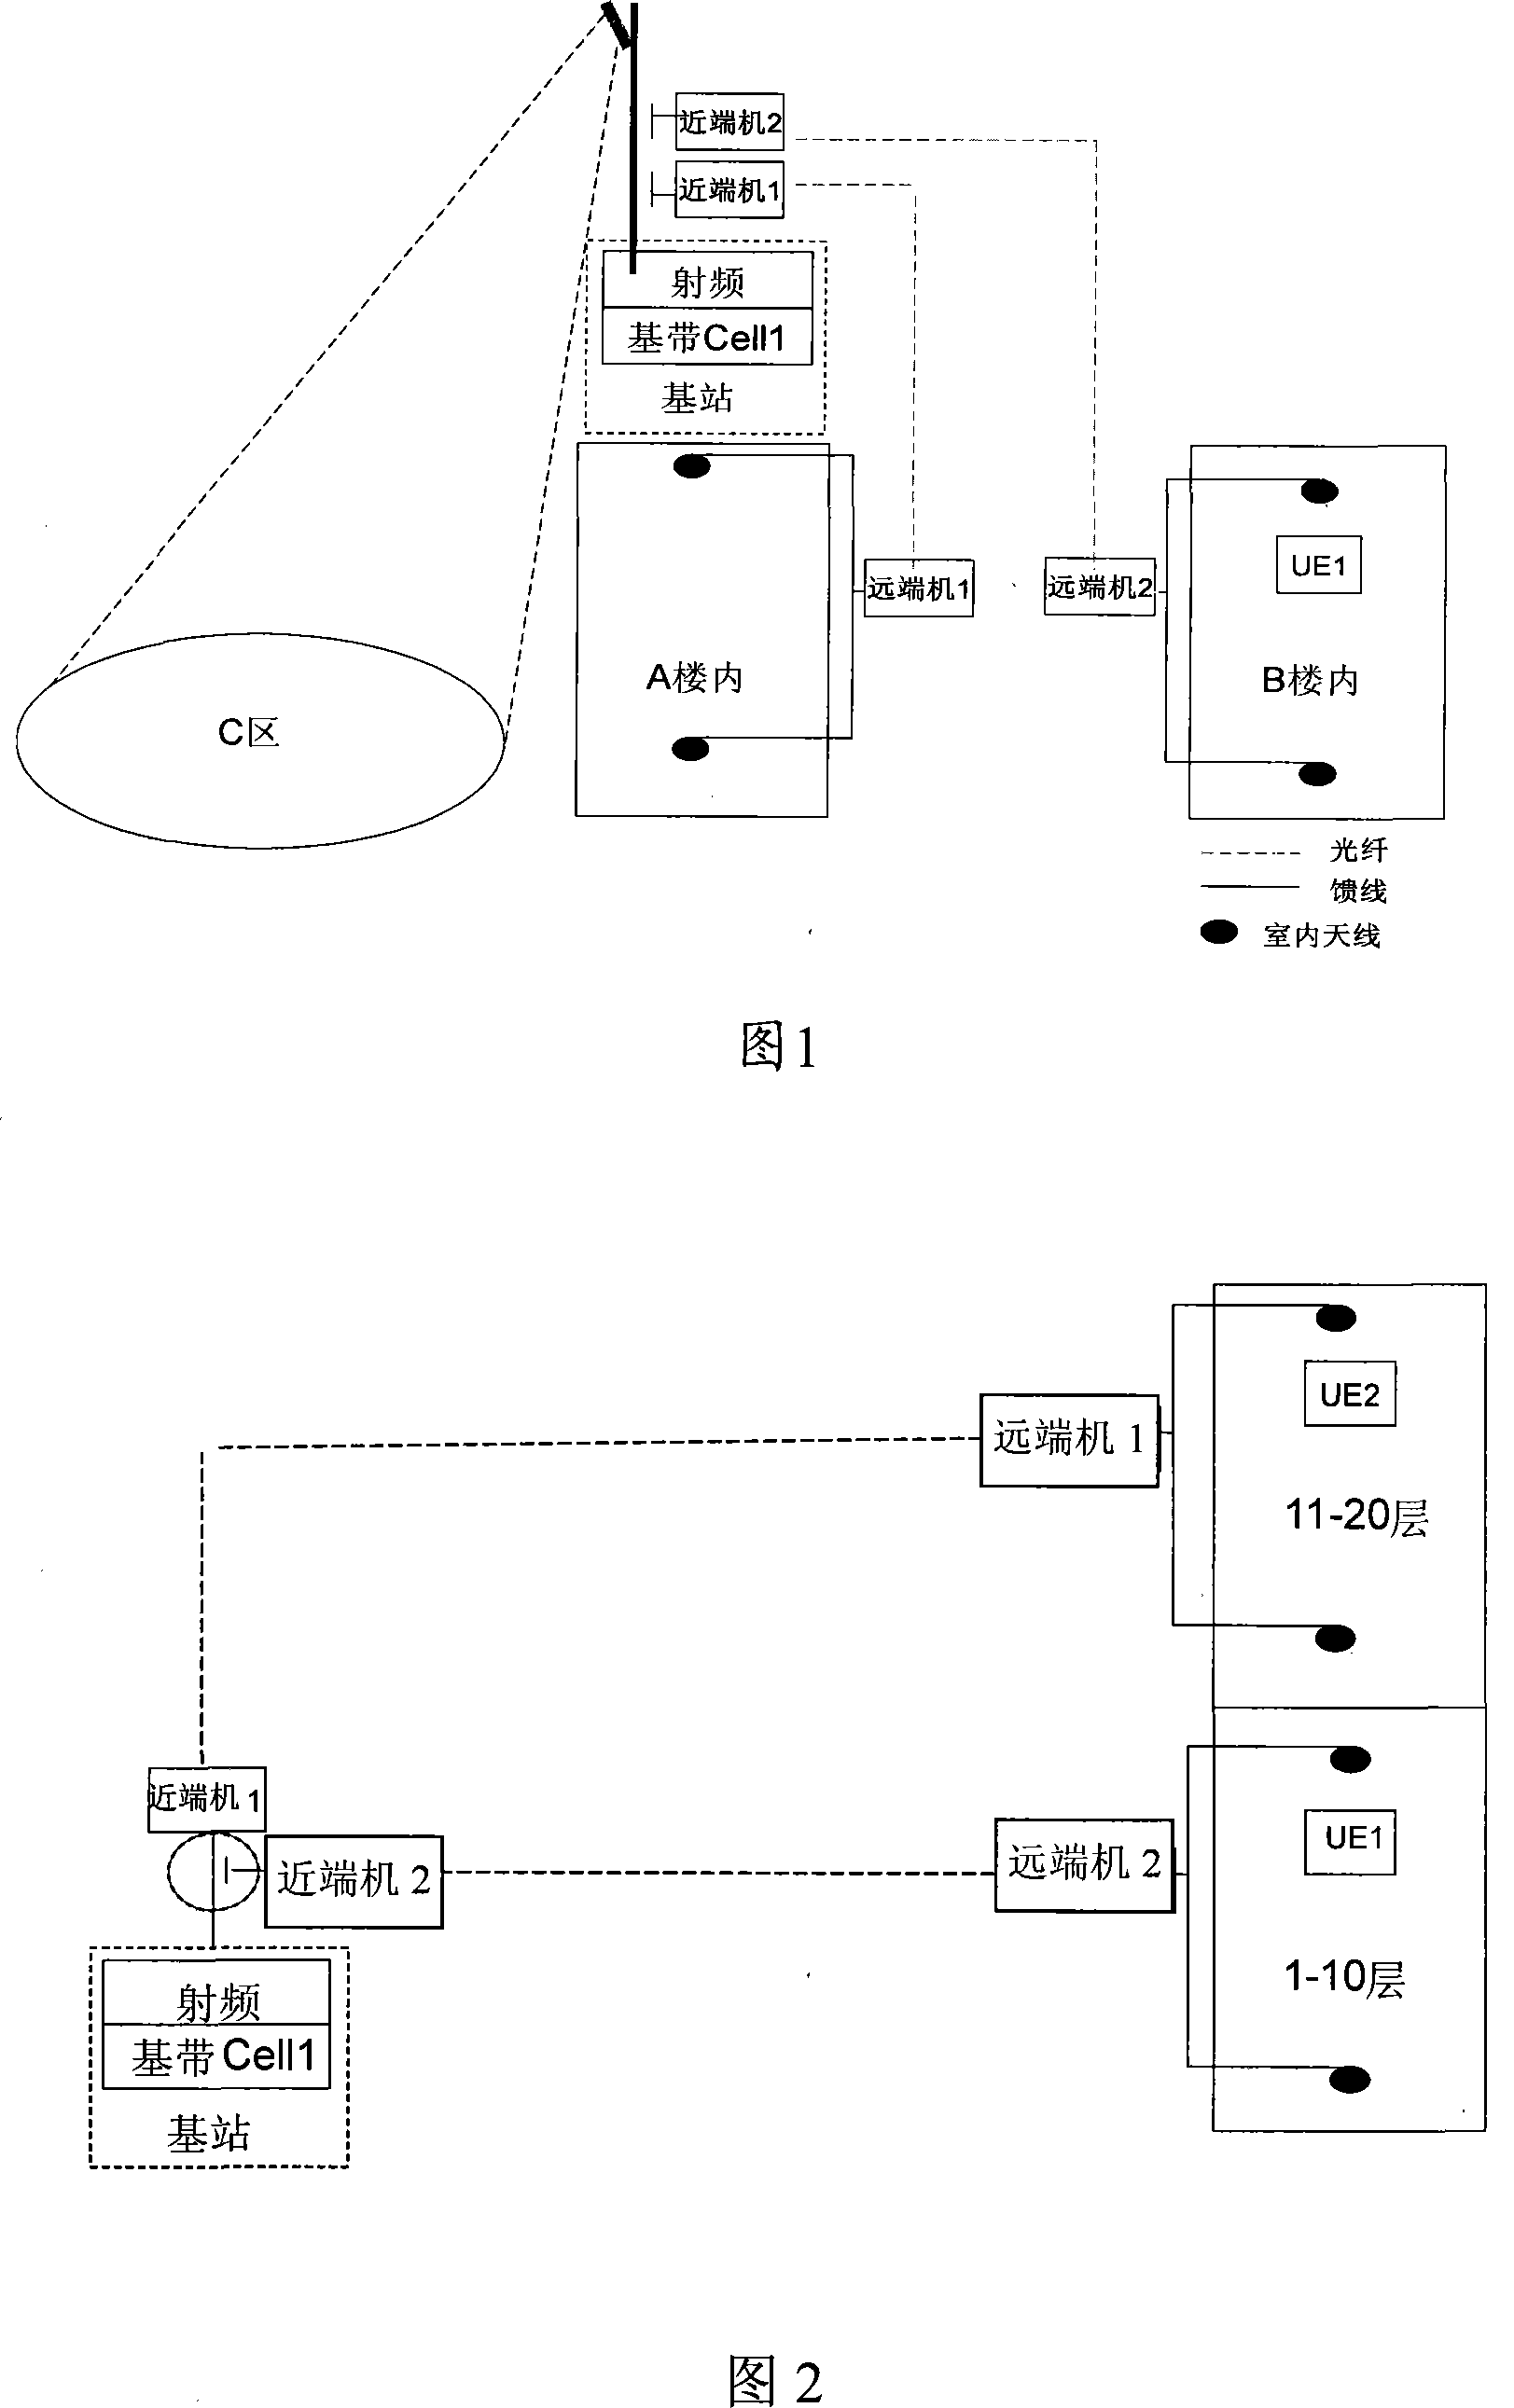 System, method and network appliance for implementing overlapping multi-region by one subdistrict